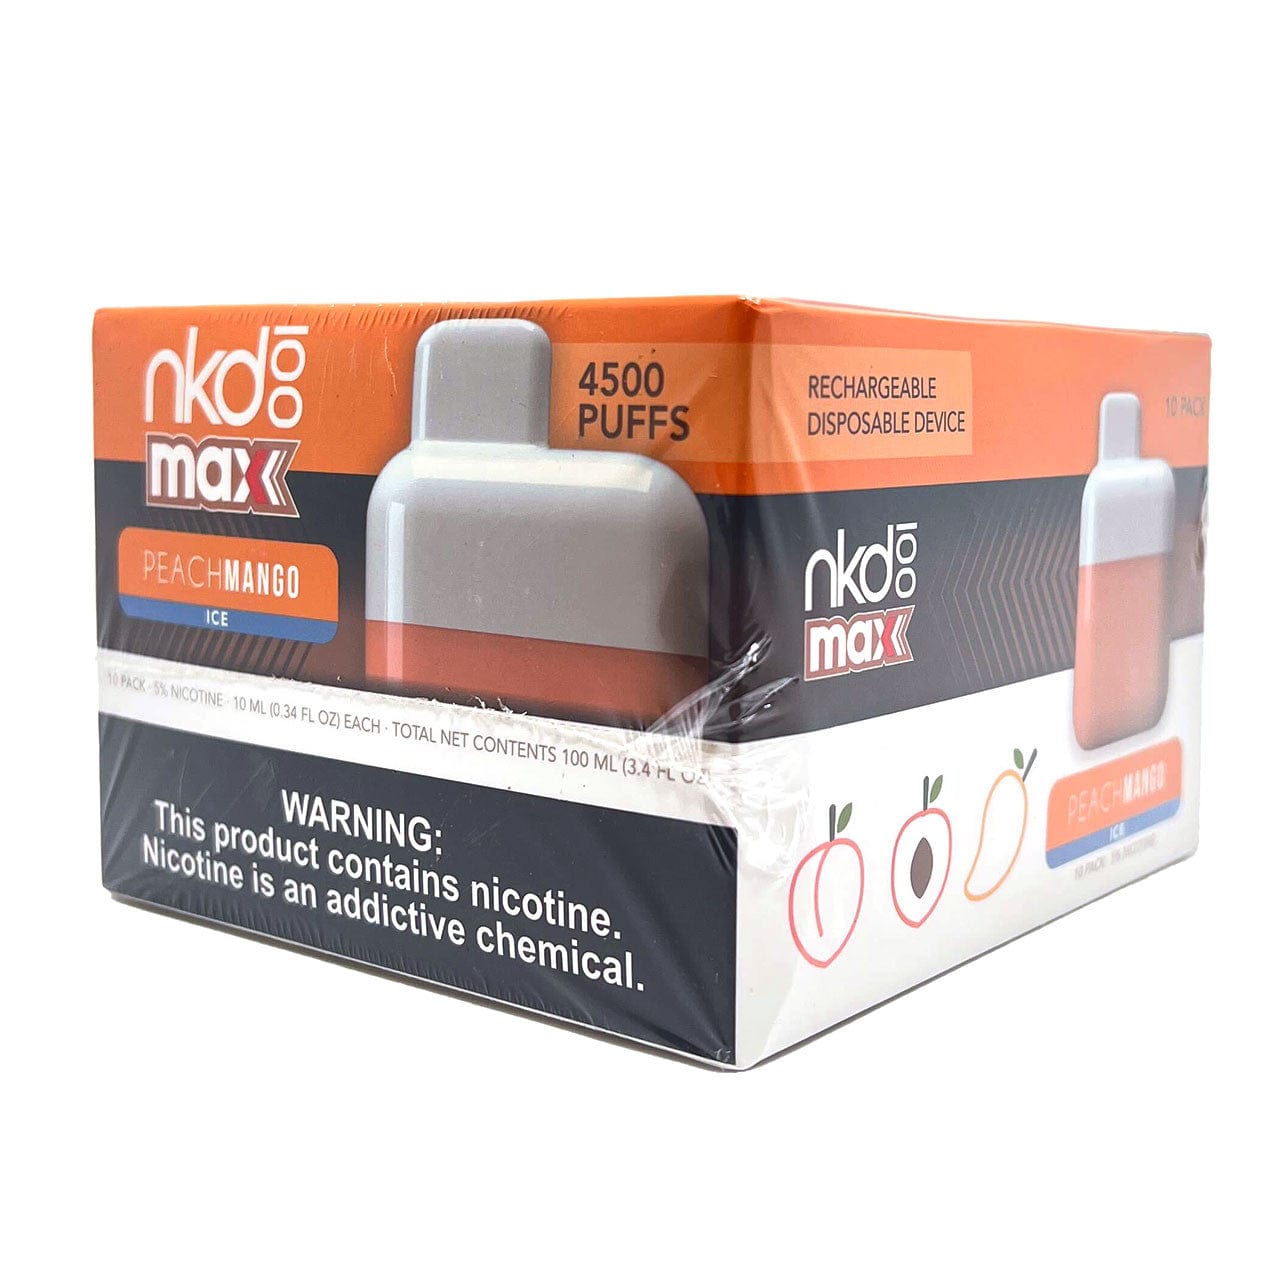 Naked 100 Max 4500 Puff Disposable Vape Wholesale 10 Pack Peach Mango Ice